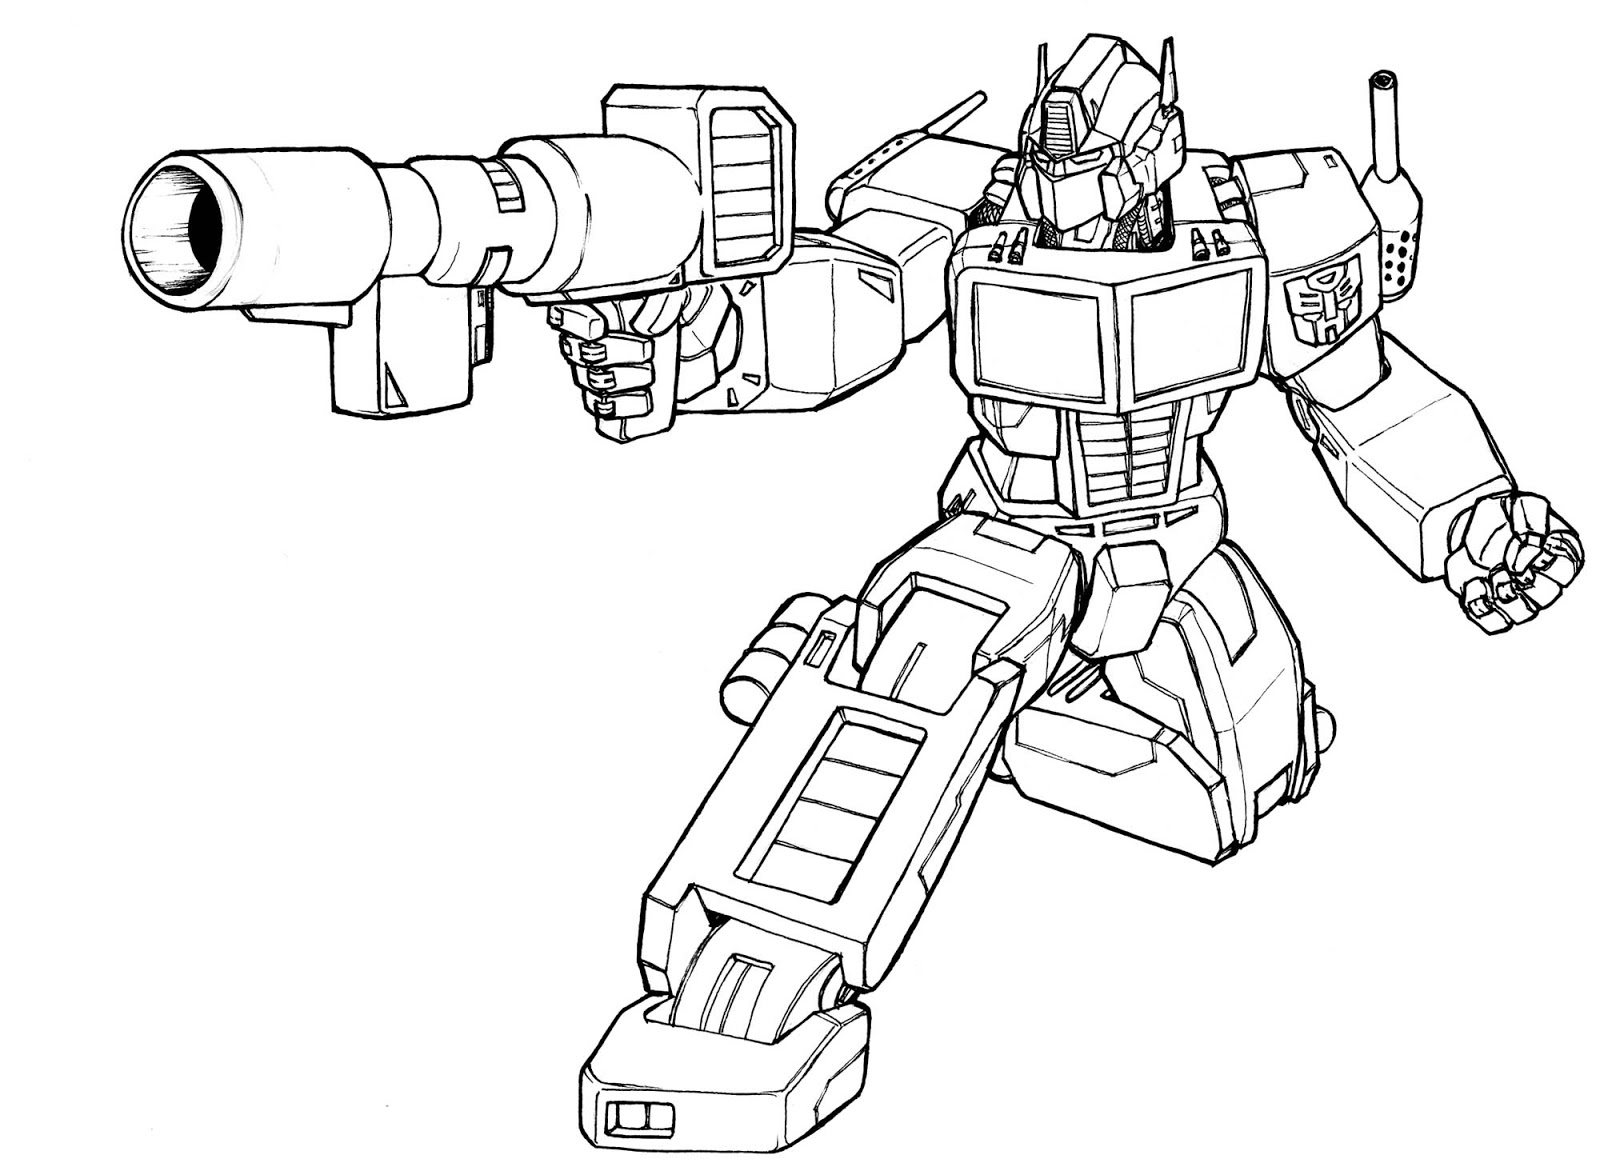  transformers coloring pages | transformer | transformers prime | transformers cars | hv transformer | #63